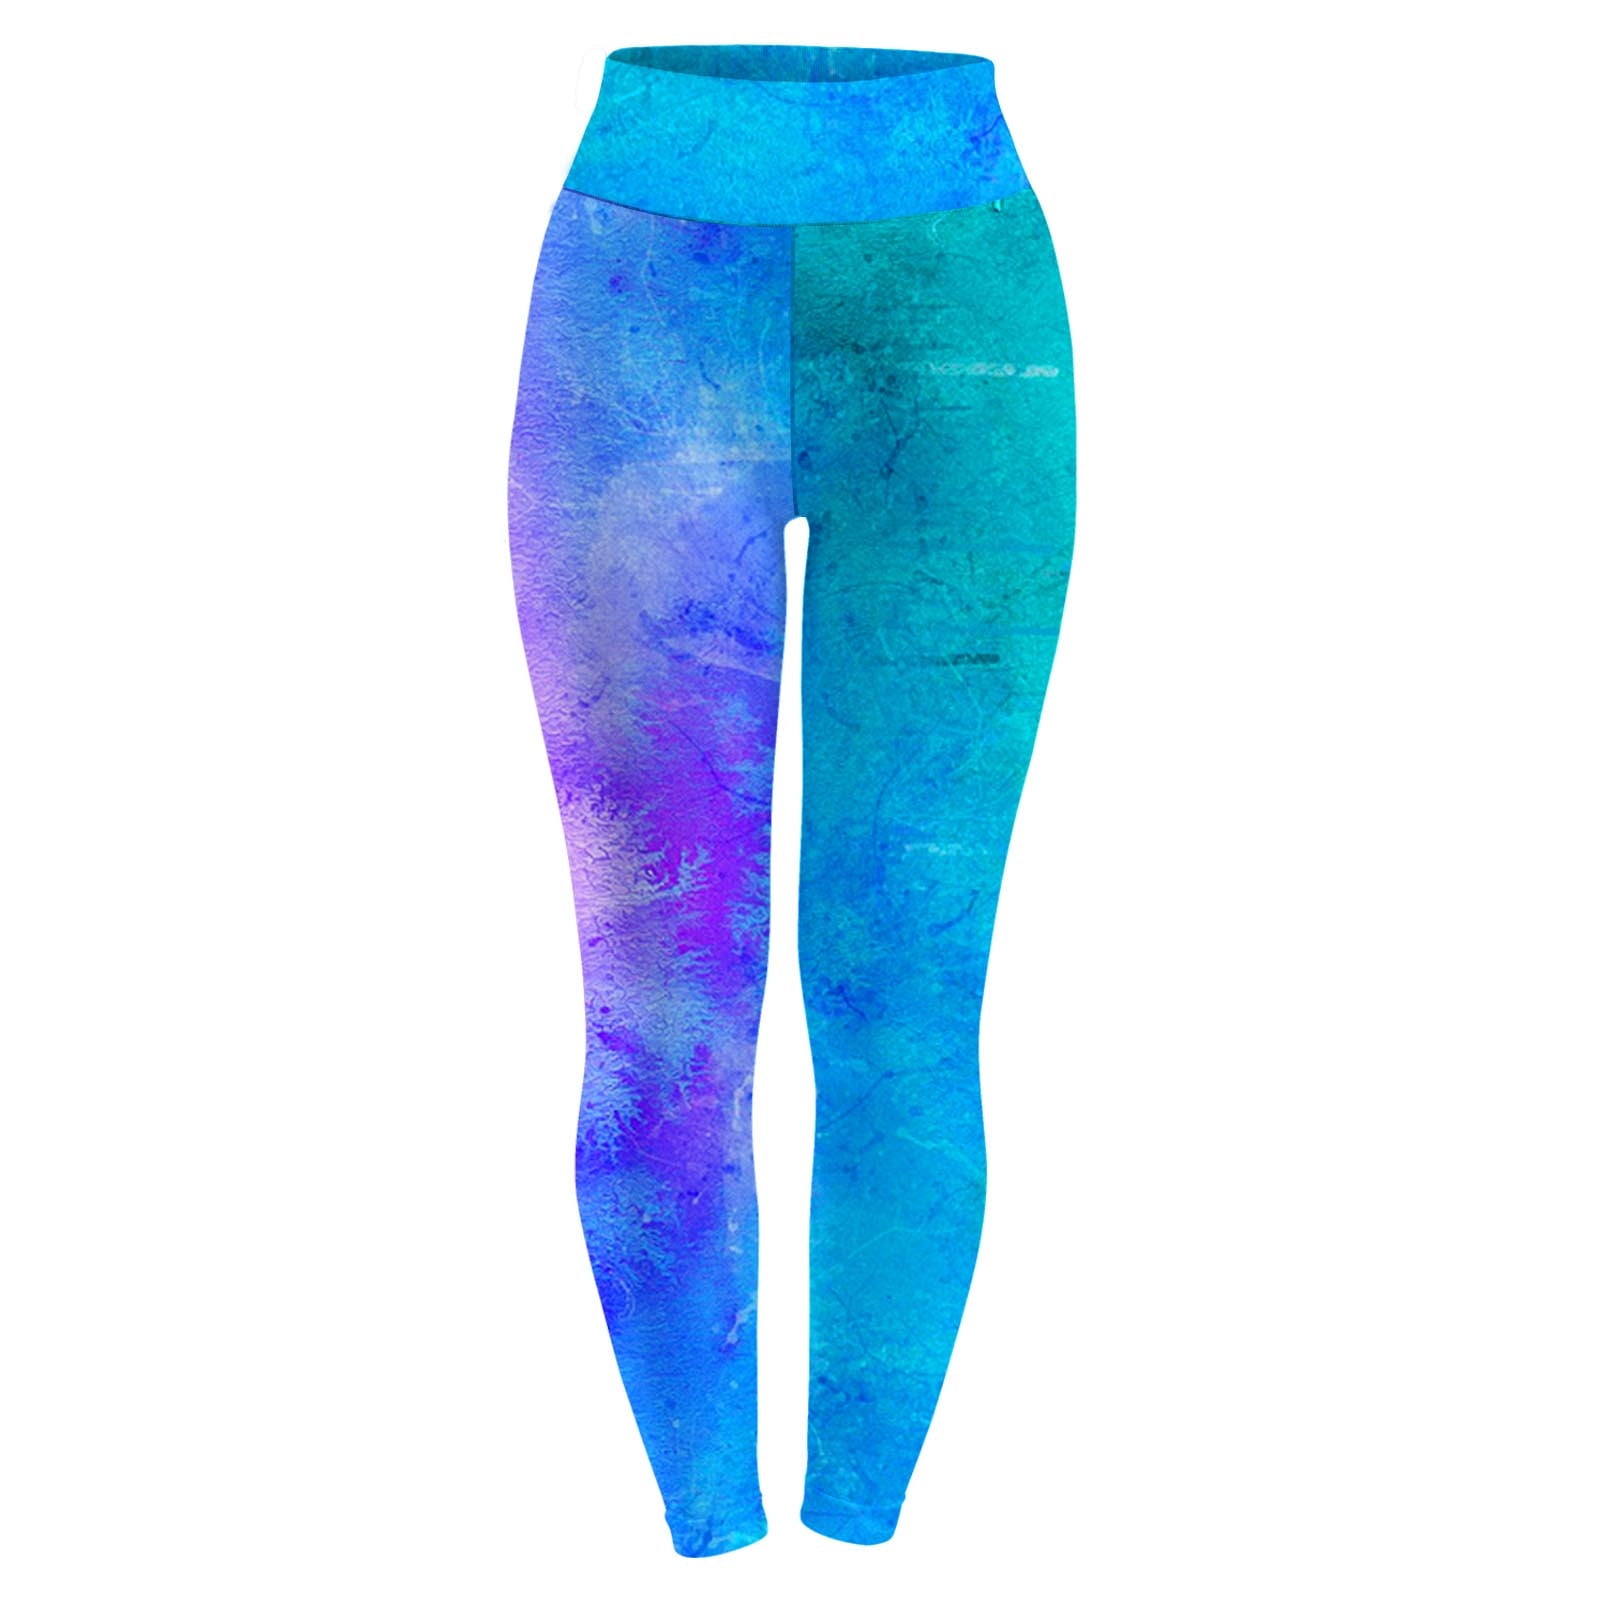 YWDJ Leggings for Women Workout Gym High Waist Sports Yogalicious Print Tie  Dye Utility Dressy Everyday Soft Fitness Girls Leggings Skinny Tie-dyed  Printed Stretchy Tights Trouser Yoga Pants Blue XL 